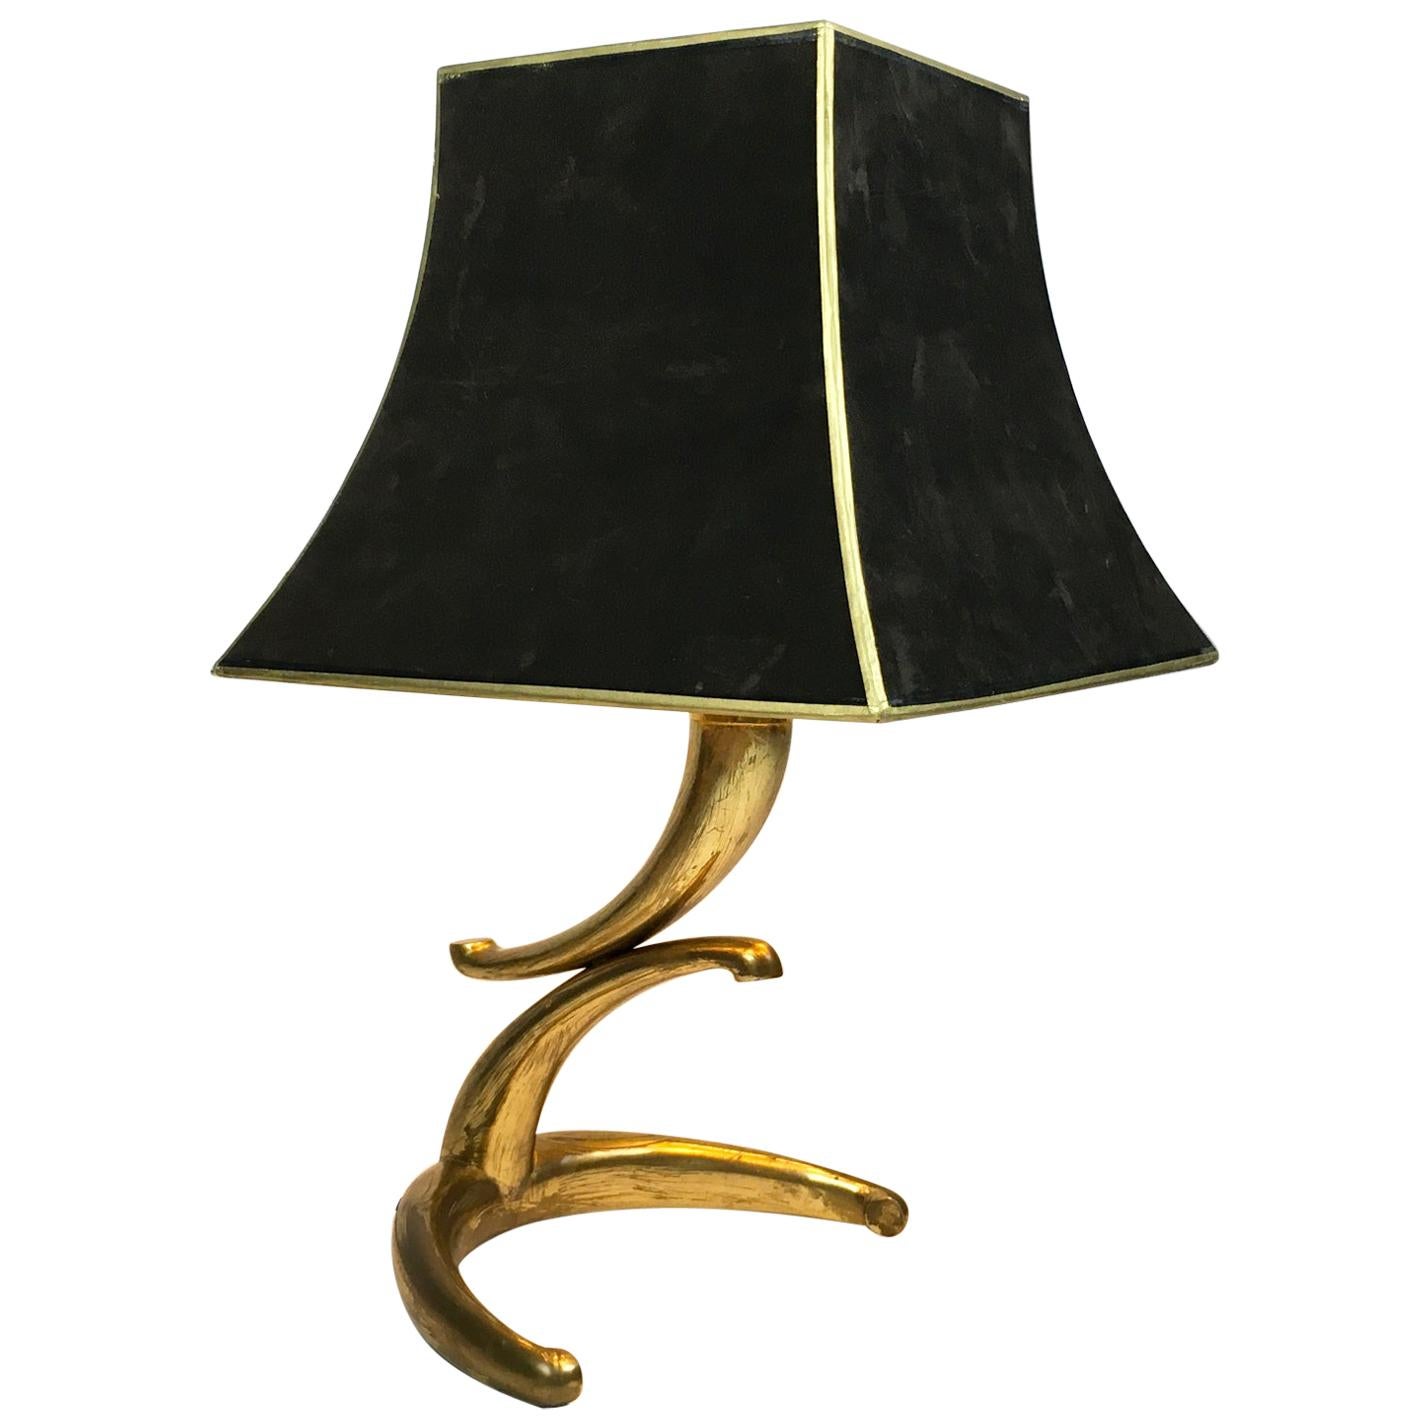 1970s Table Lamp in Solid Brass Horns Shape with Velvet Lampshade, France For Sale